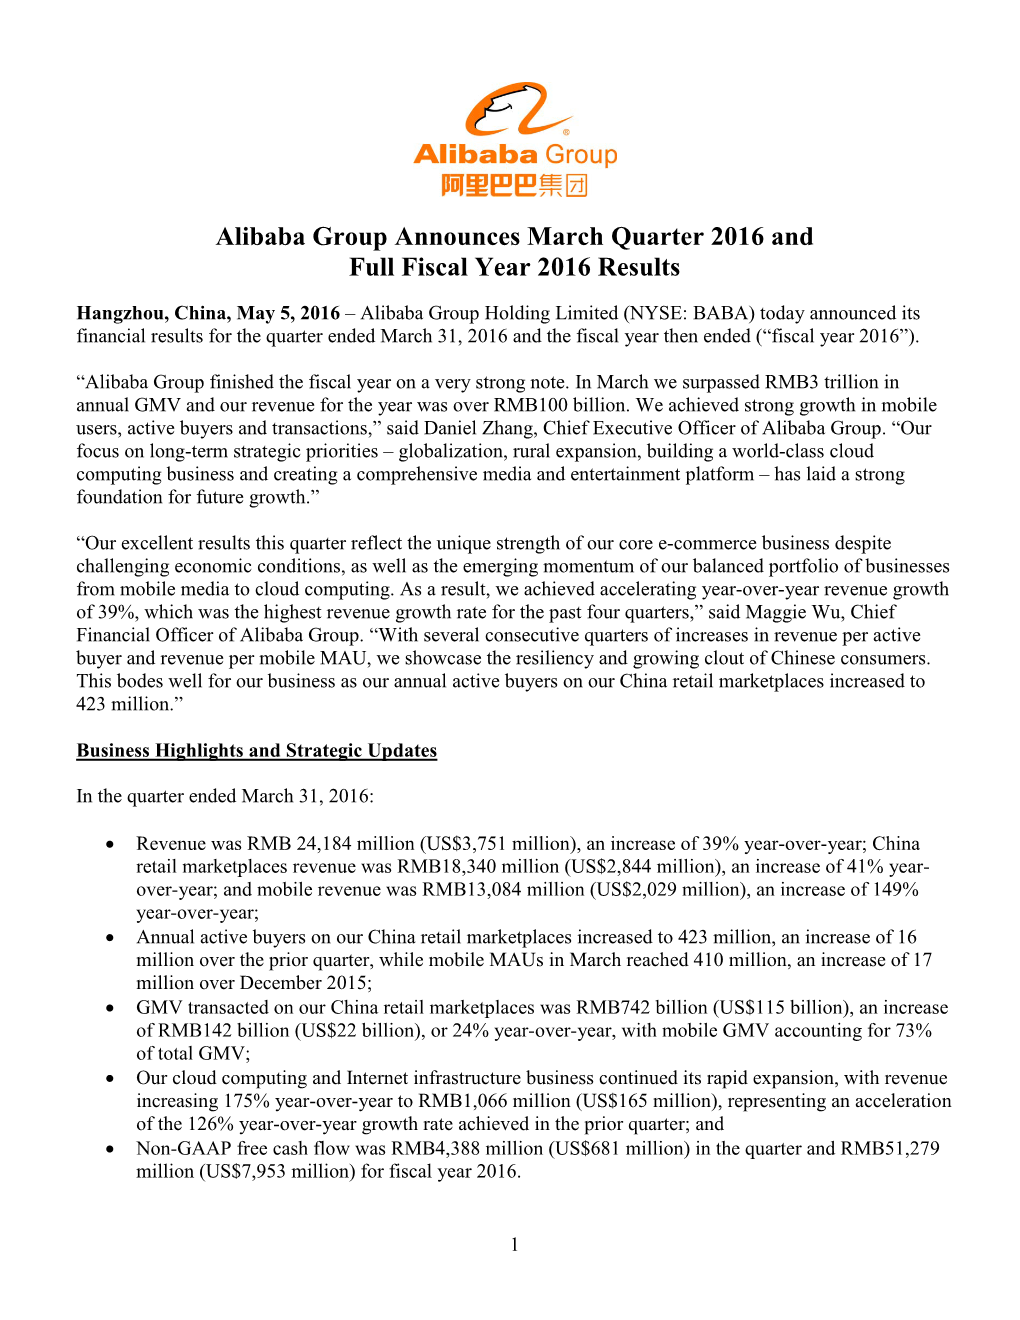 Alibaba Group Announces March Quarter 2016 and Full Fiscal Year 2016 Results